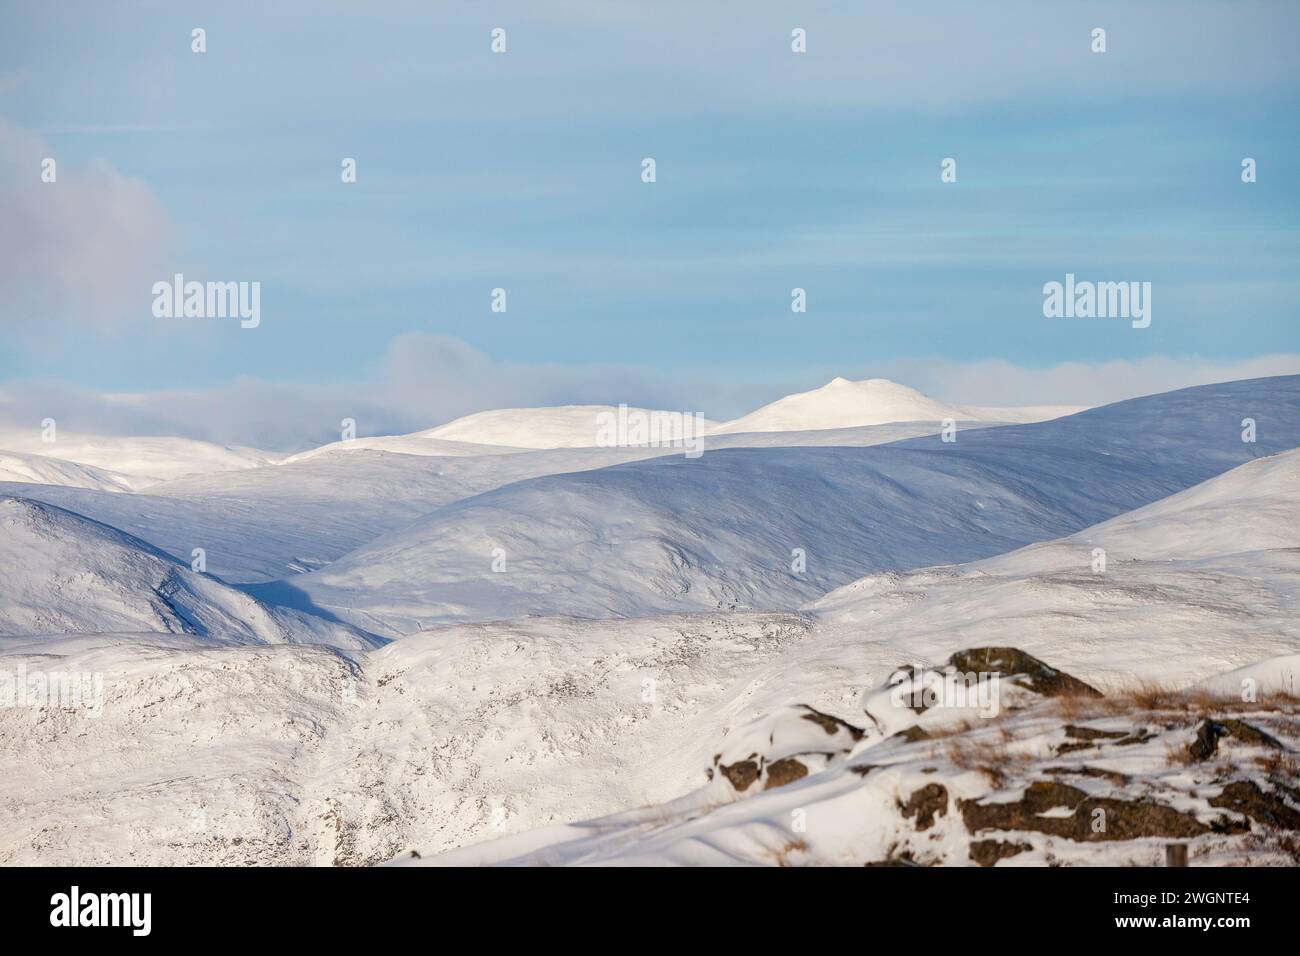 A winter wonderland in Glenshee with the distinctive pointed summit of Carn Bhinnein Stock Photo